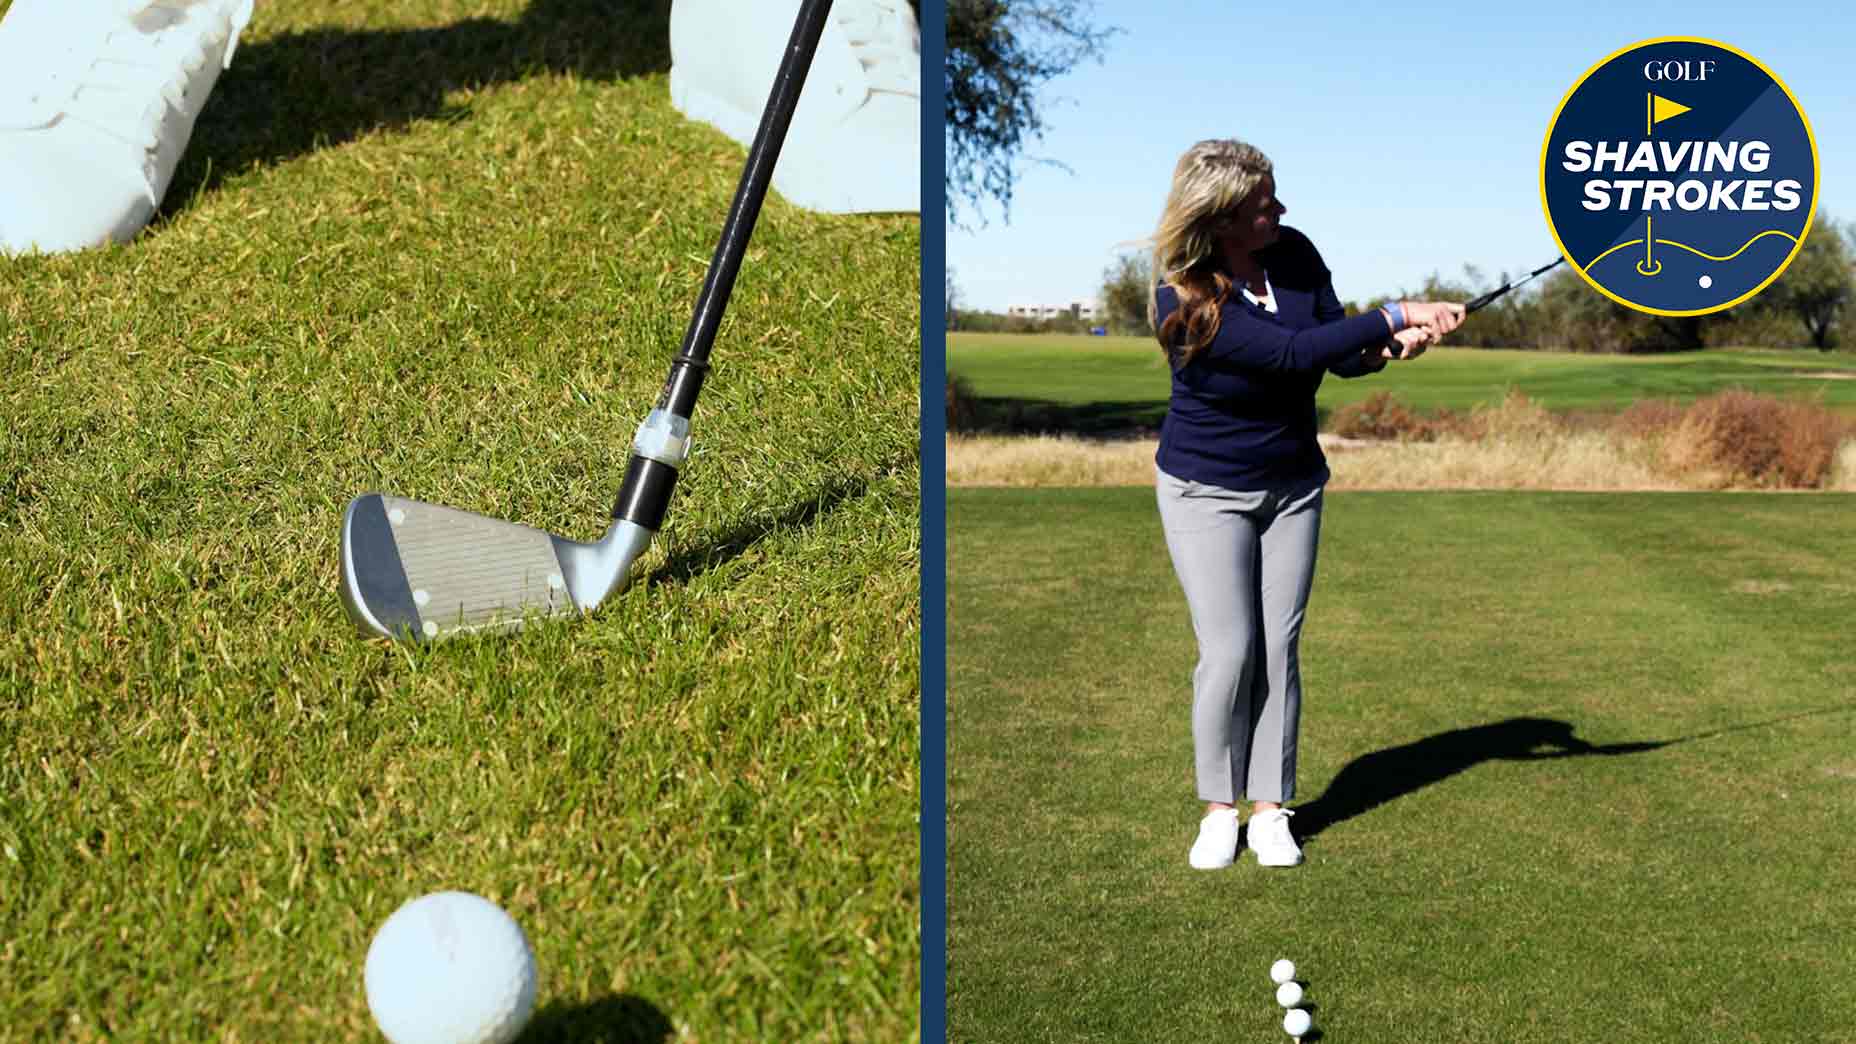 With the help of teaching professional Stefanie Shaw, players can learn how to release the club, which leads to further, straighter shots